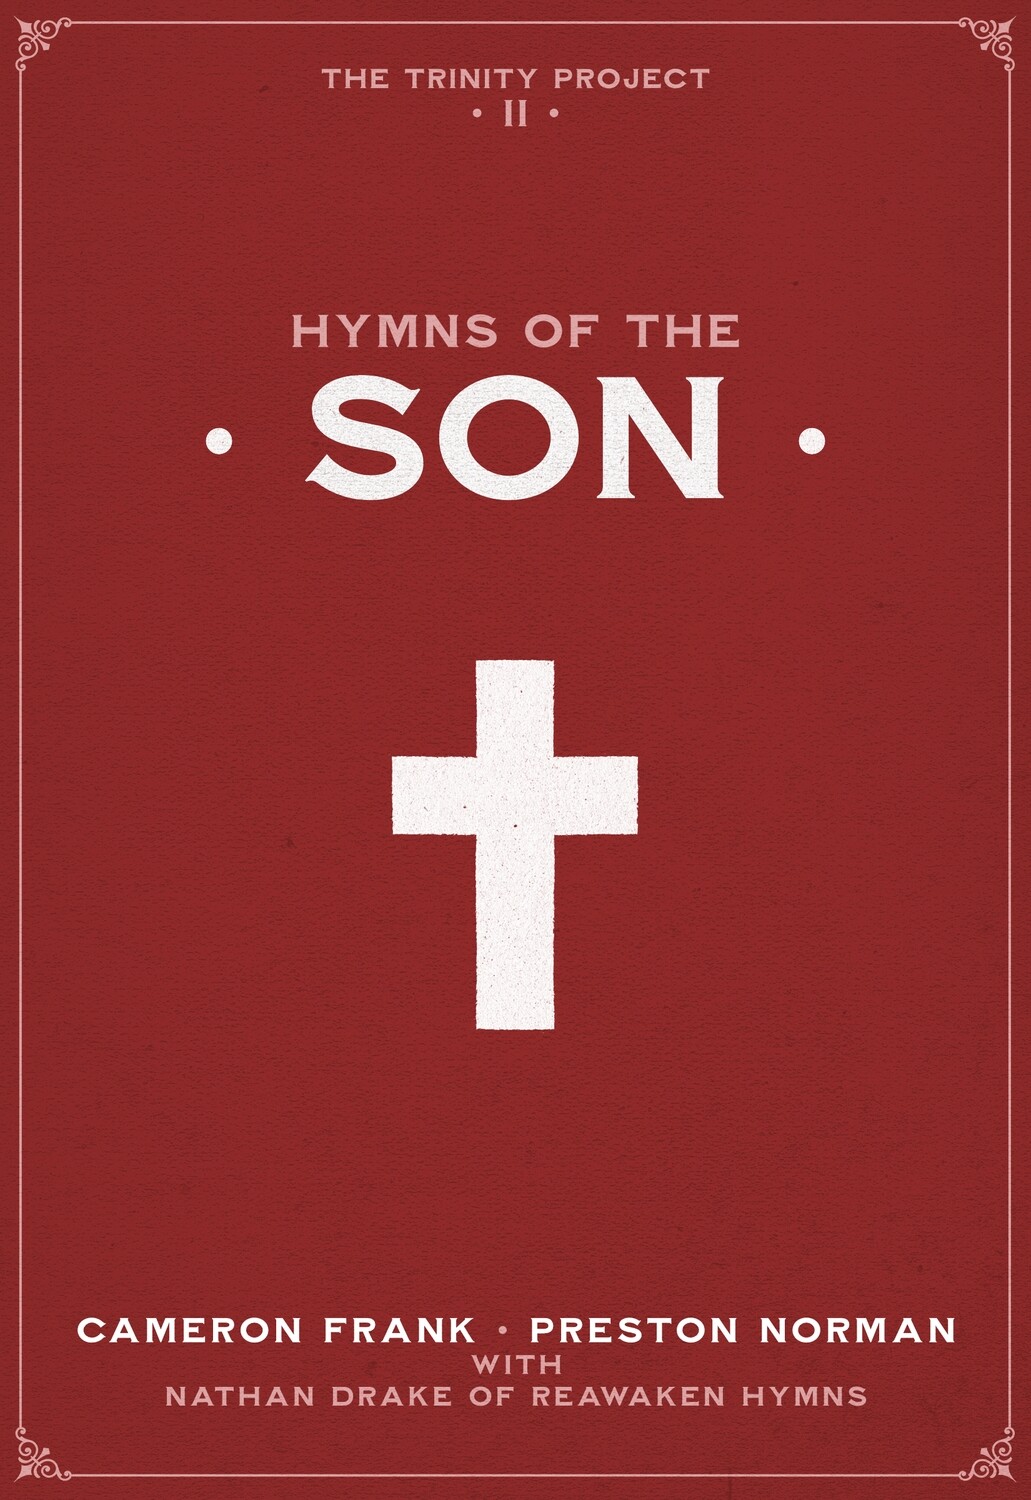 Hymns of the Son - Devotional ebook